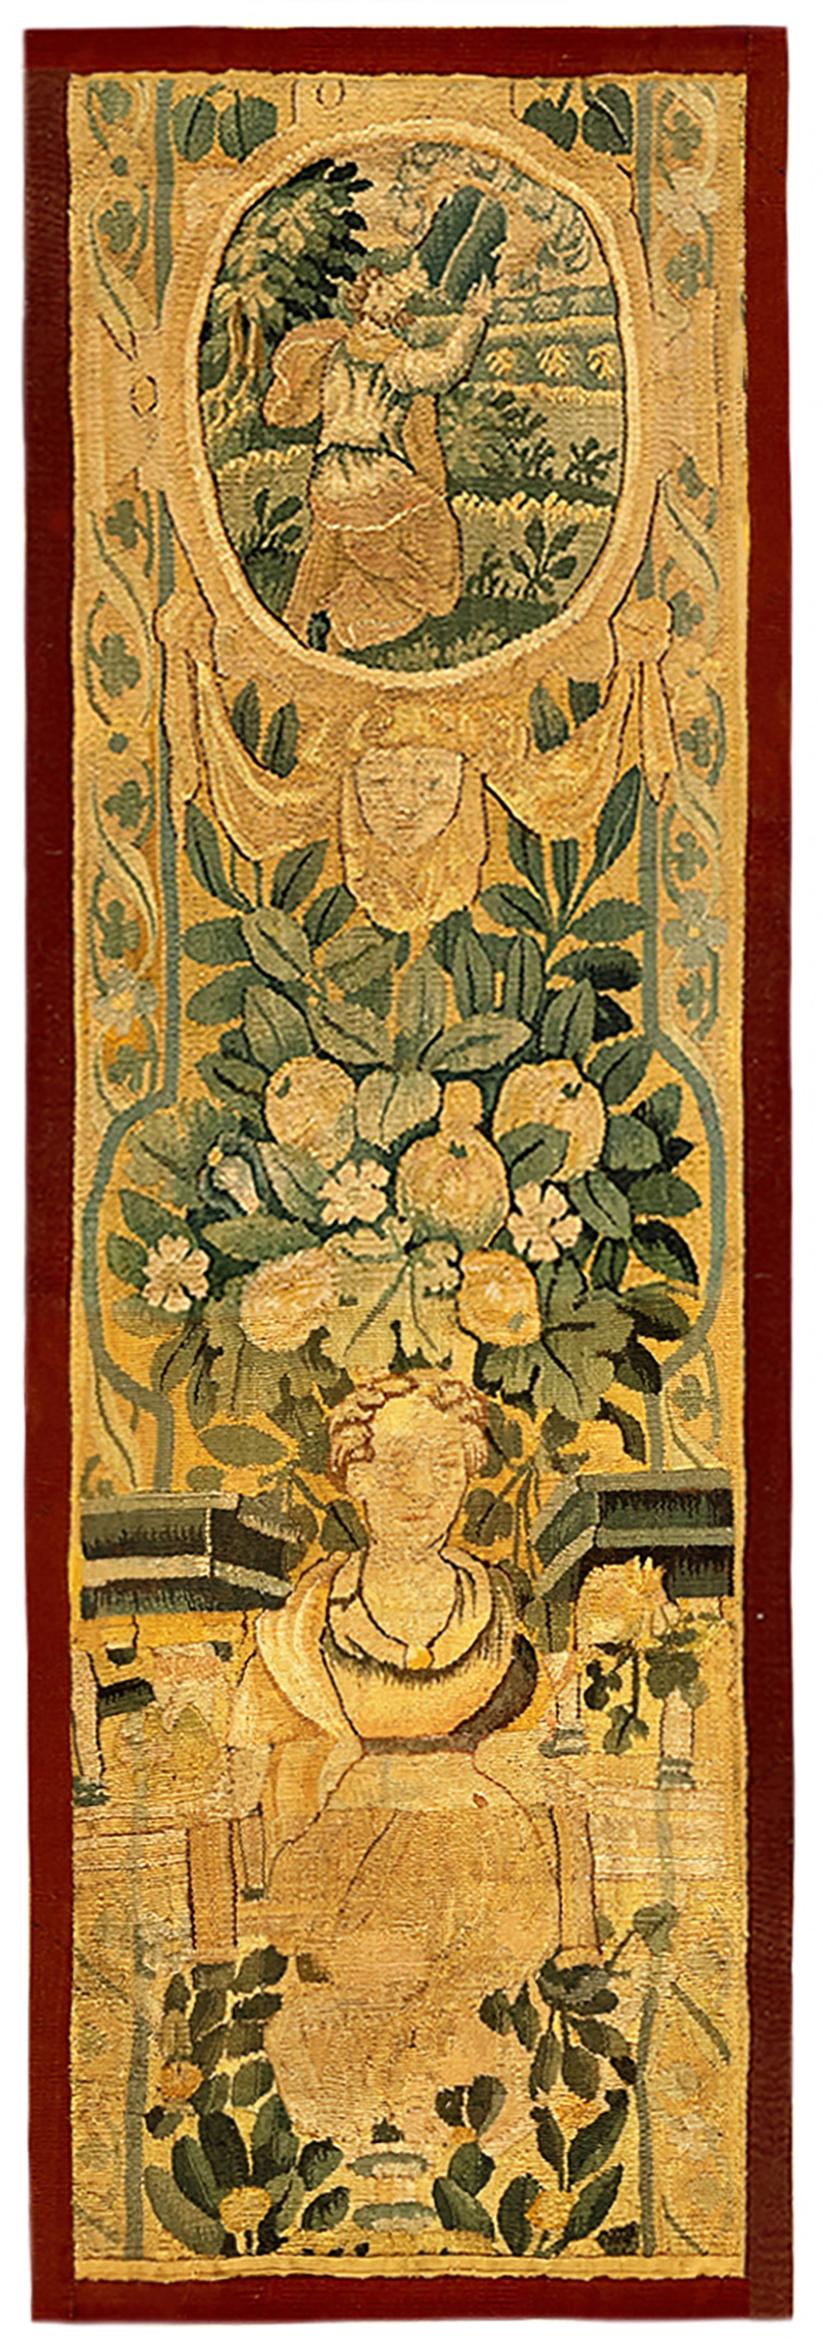 A pair of two 17th century Flemish Historical Tapestry Panels. These vertically oriented decorative tapestry panels depict female figures at bottom, with floral reserve above them, and with other female figures in pendant cartouches at top. The